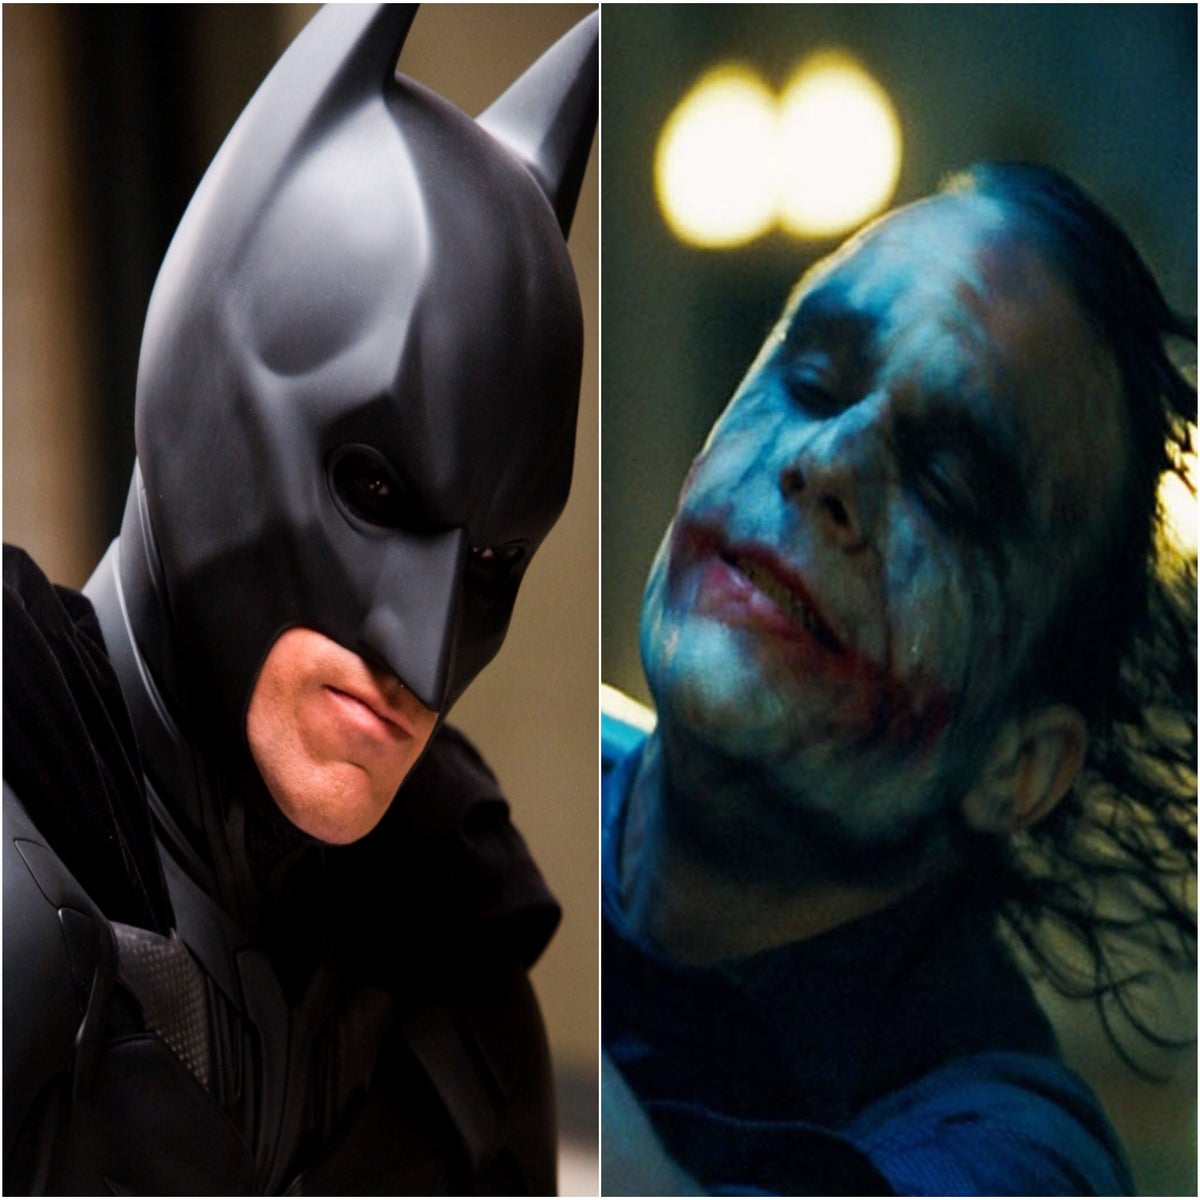 Christian Bale's most brutal Dark Knight scene with the Joker actor Heath  Ledger was actually real | The Independent